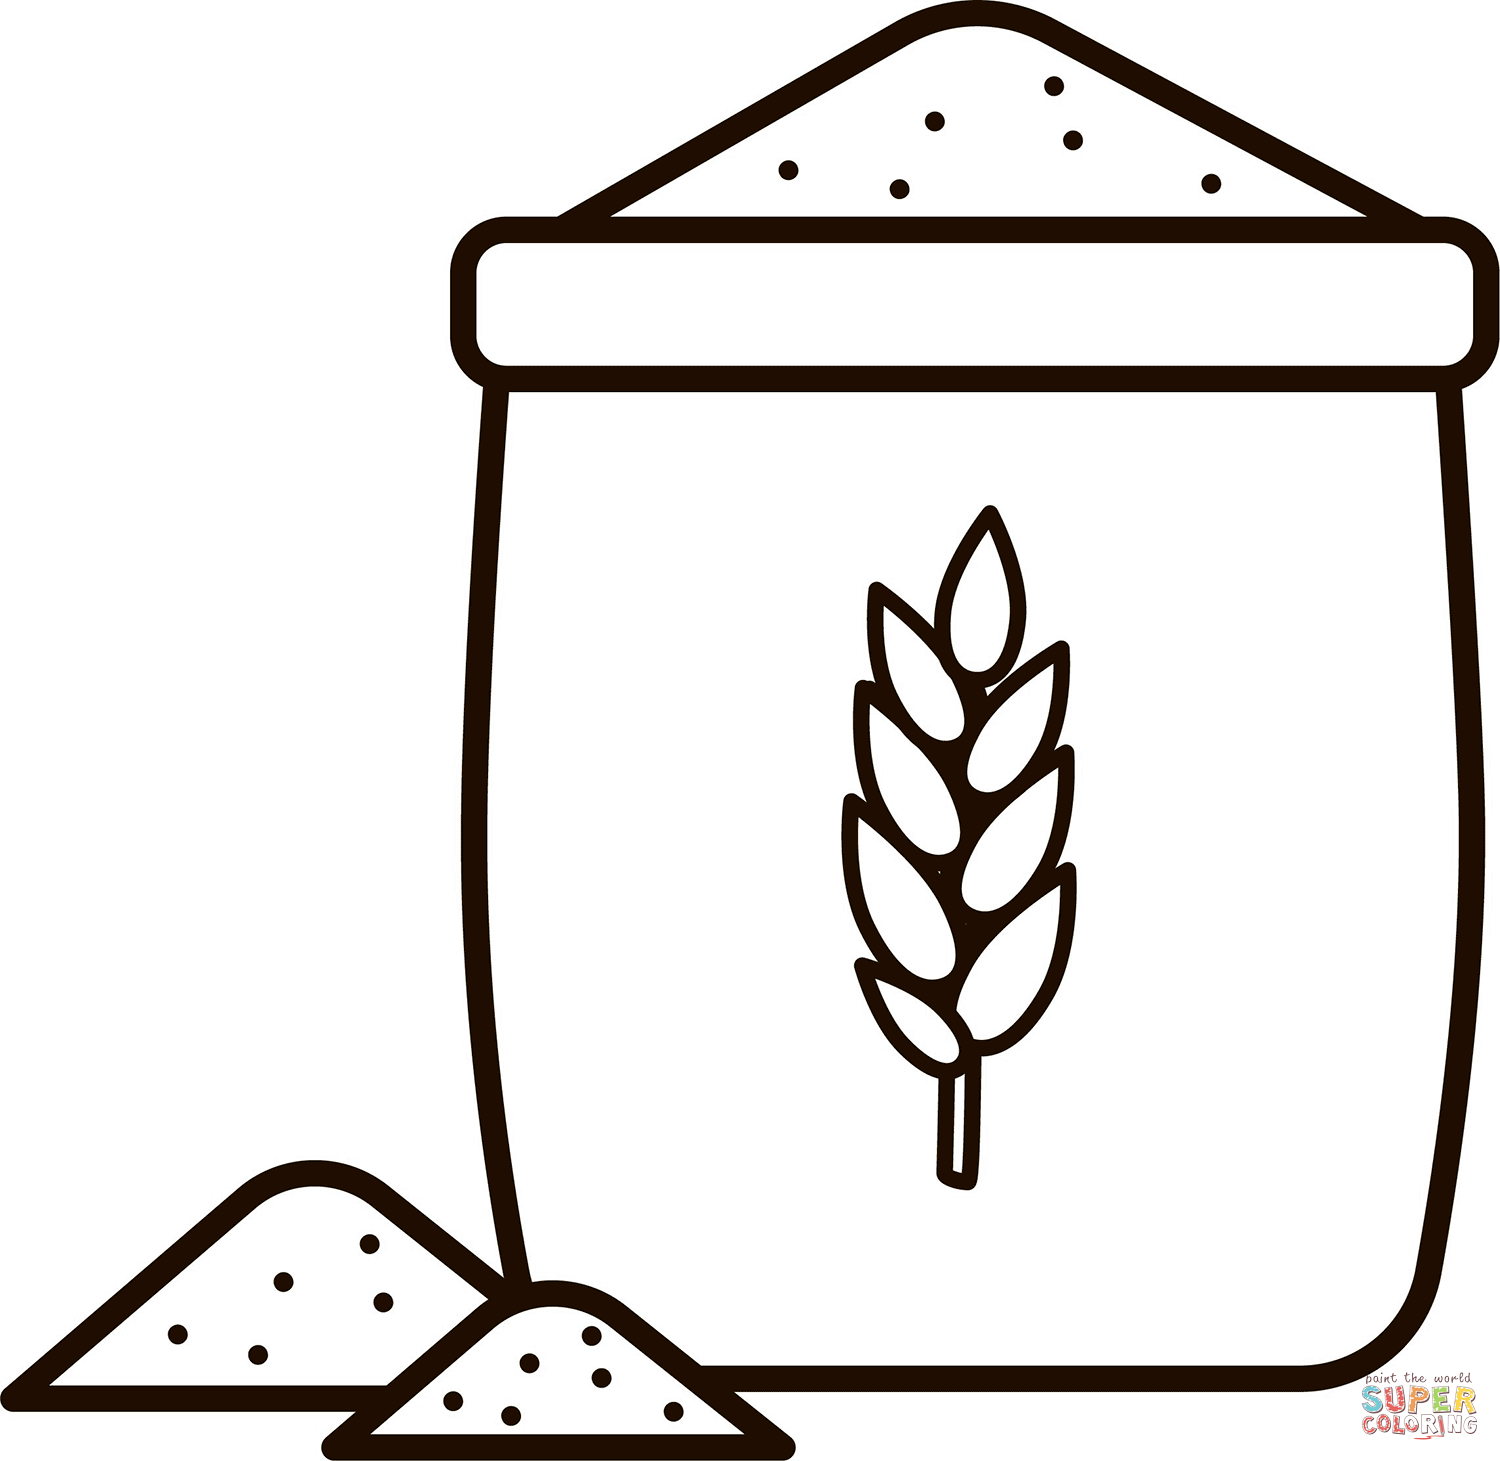 Flour coloring page | Free Printable Coloring Pages